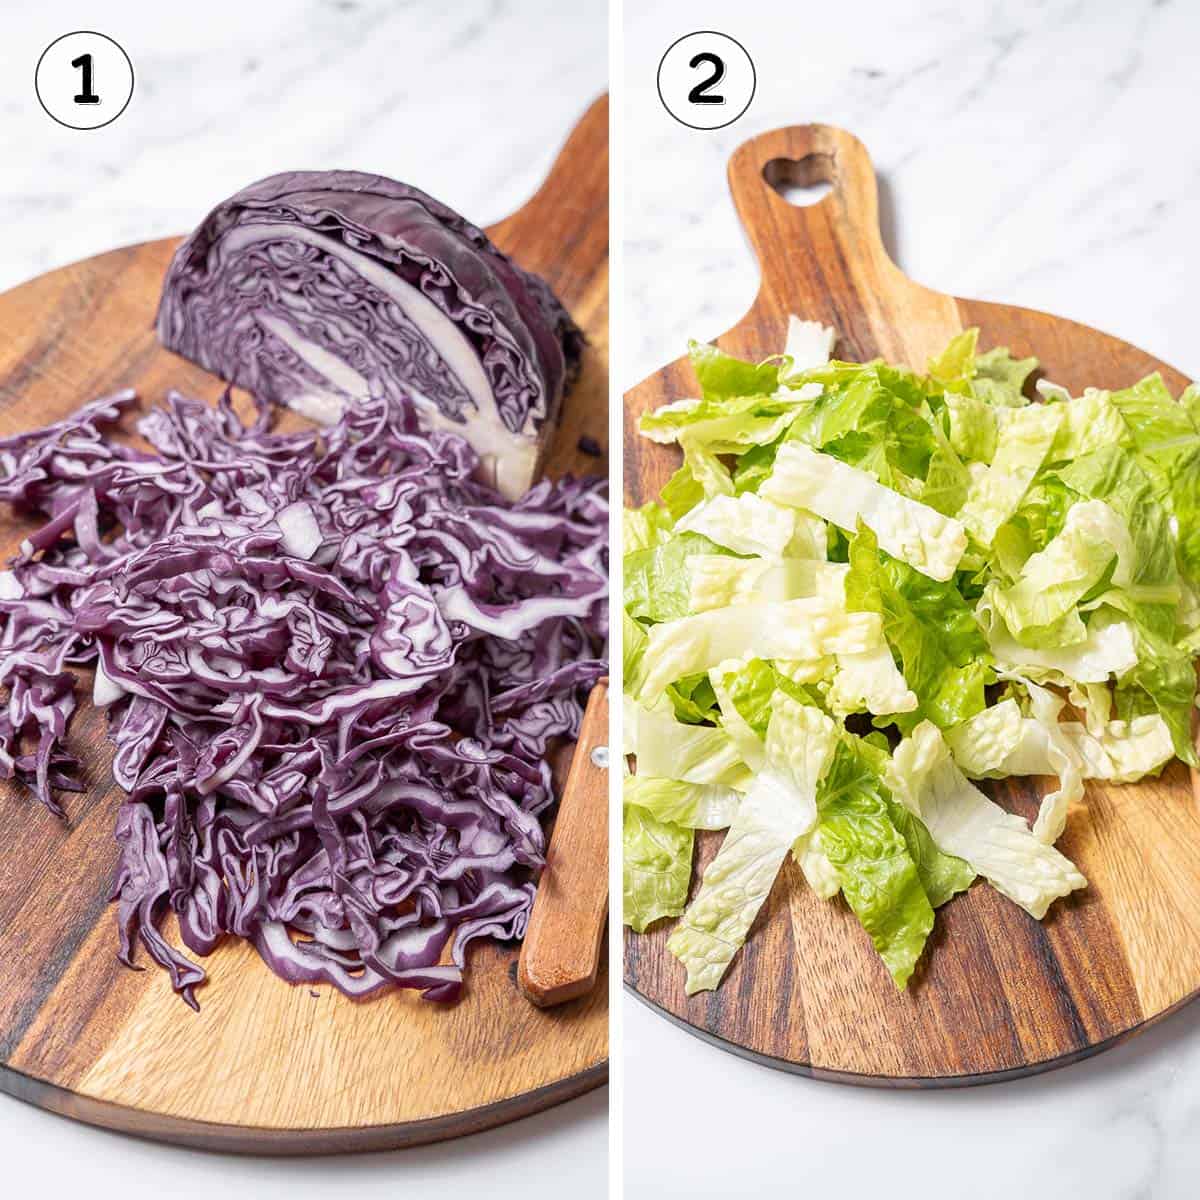 cutting the red cabbage and lettuce for salad.